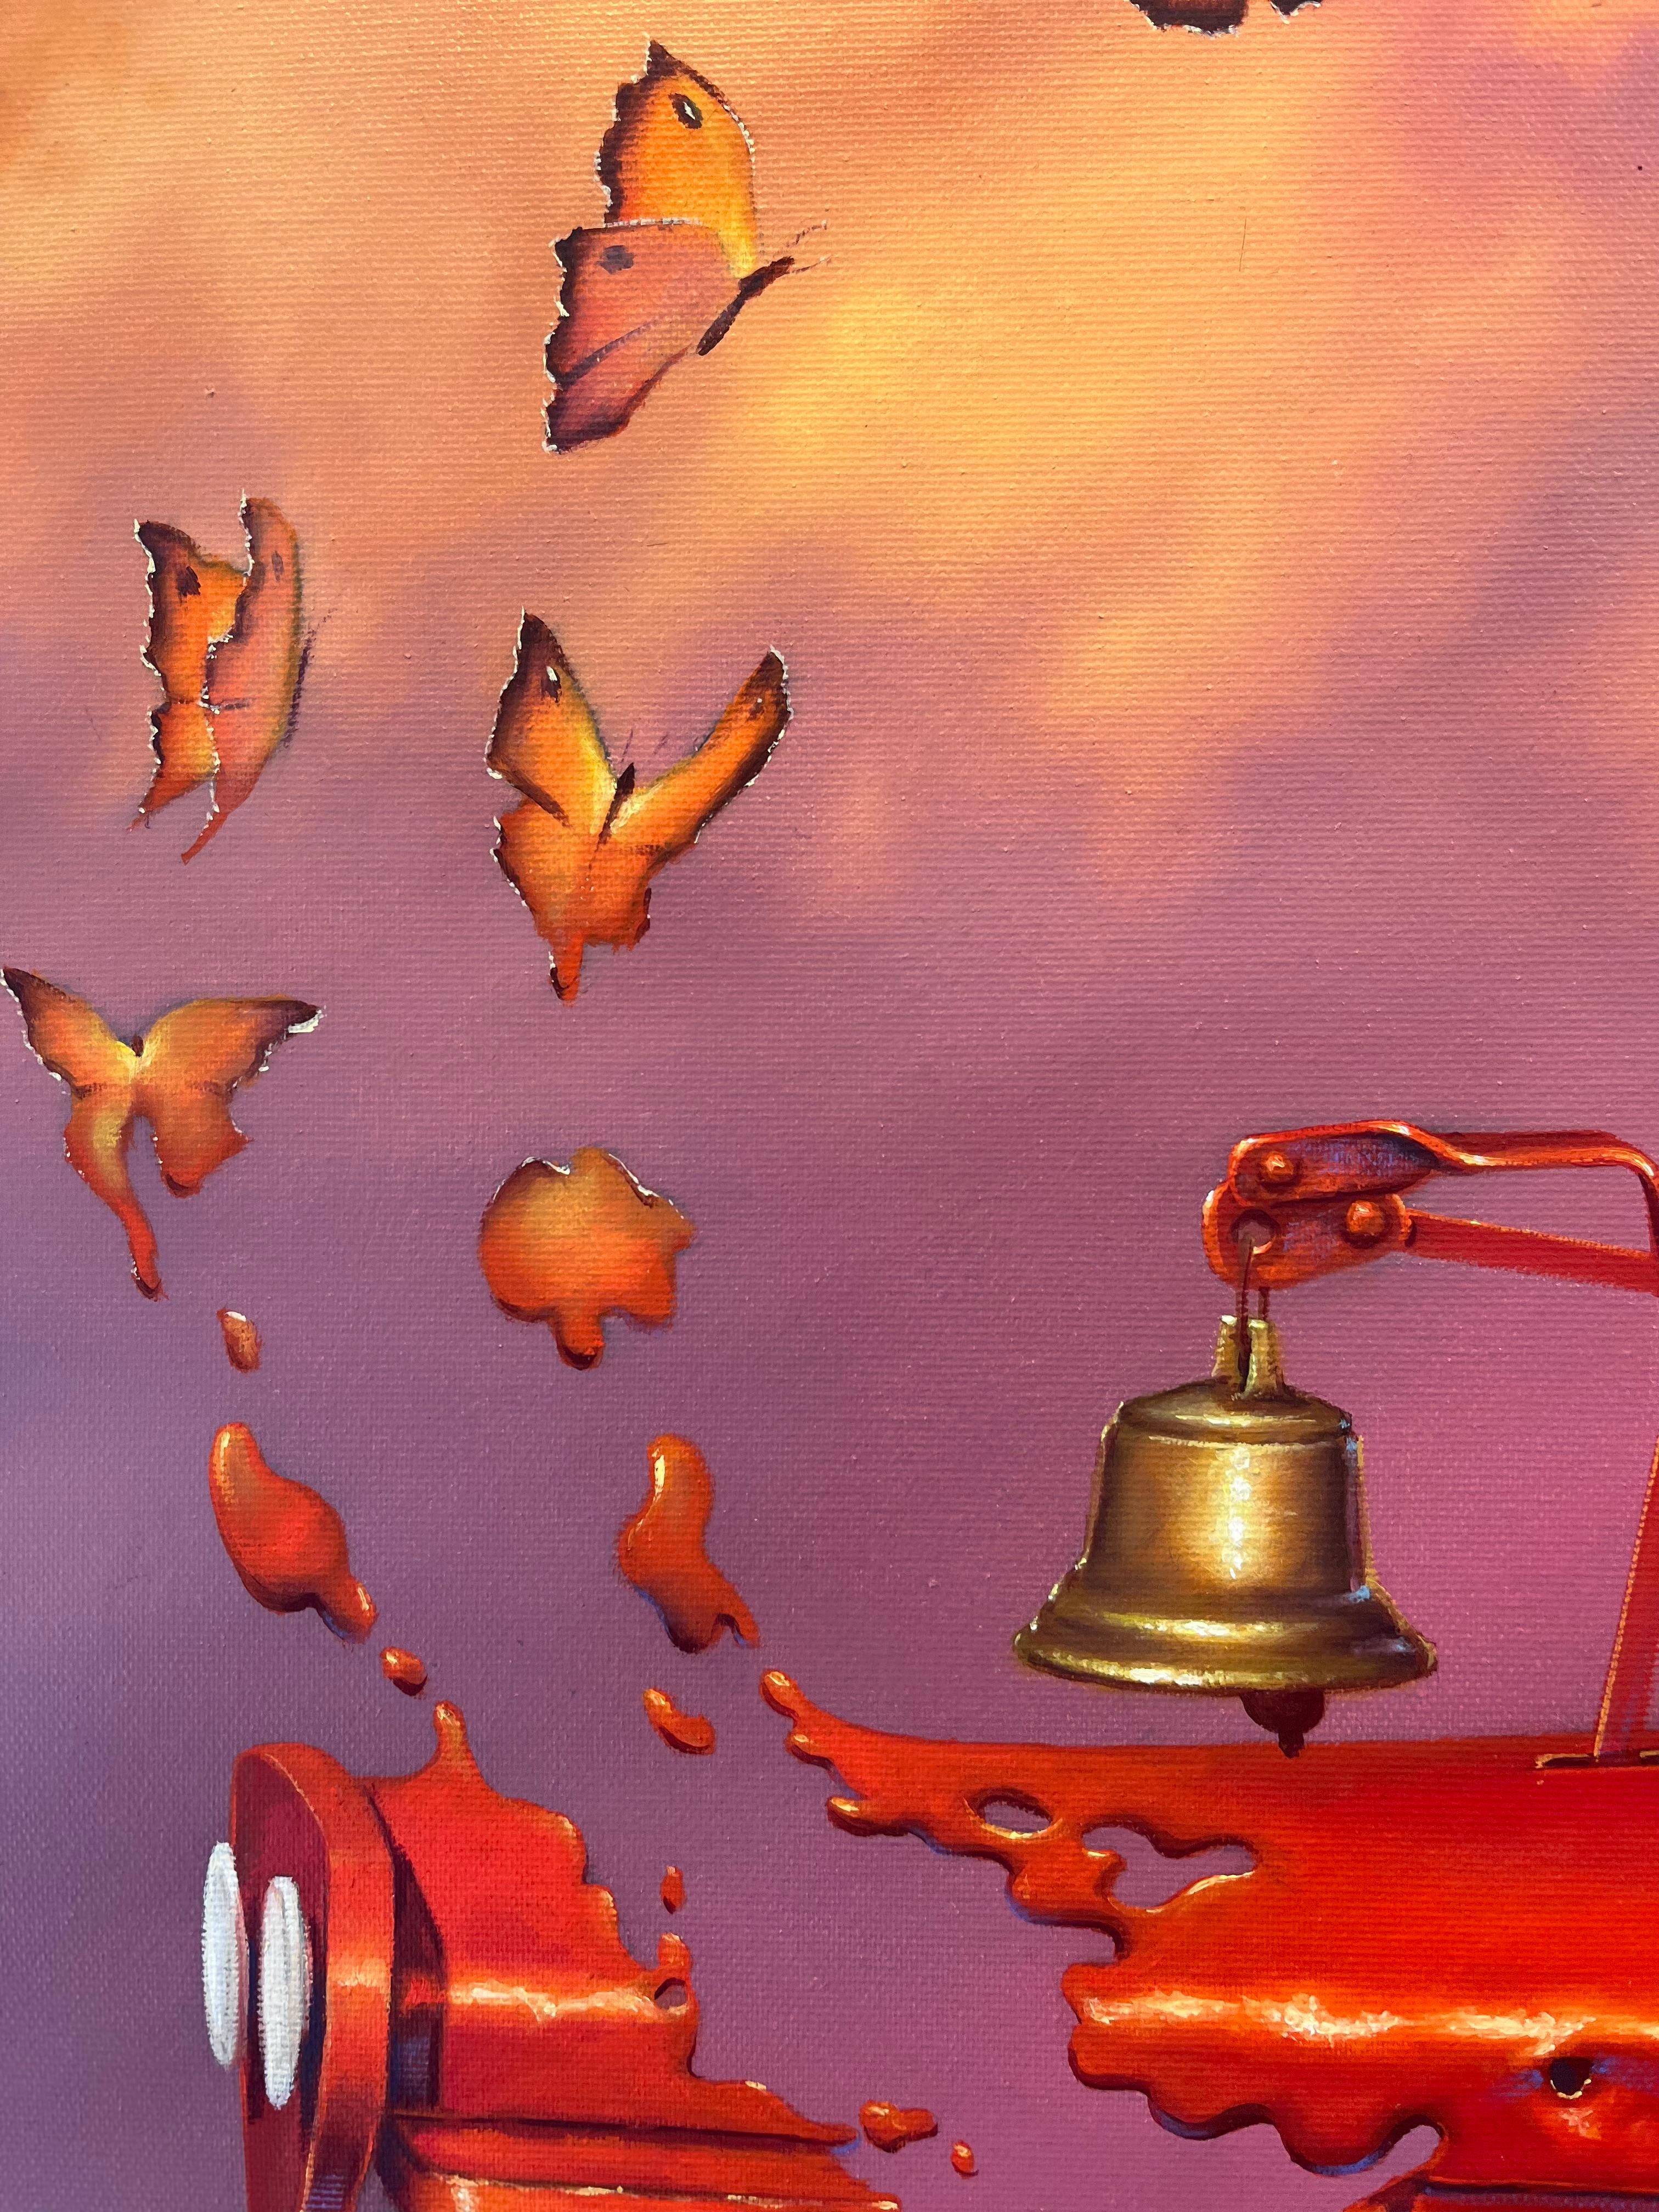 Contemporary painter Laurence O’Toole imaprts a surrealistic landscape scene which captures his classic motif of a red truck, transforming into a cluster of butterflies. This imaginary still life is suffused with glowing, pastel hues and involves a